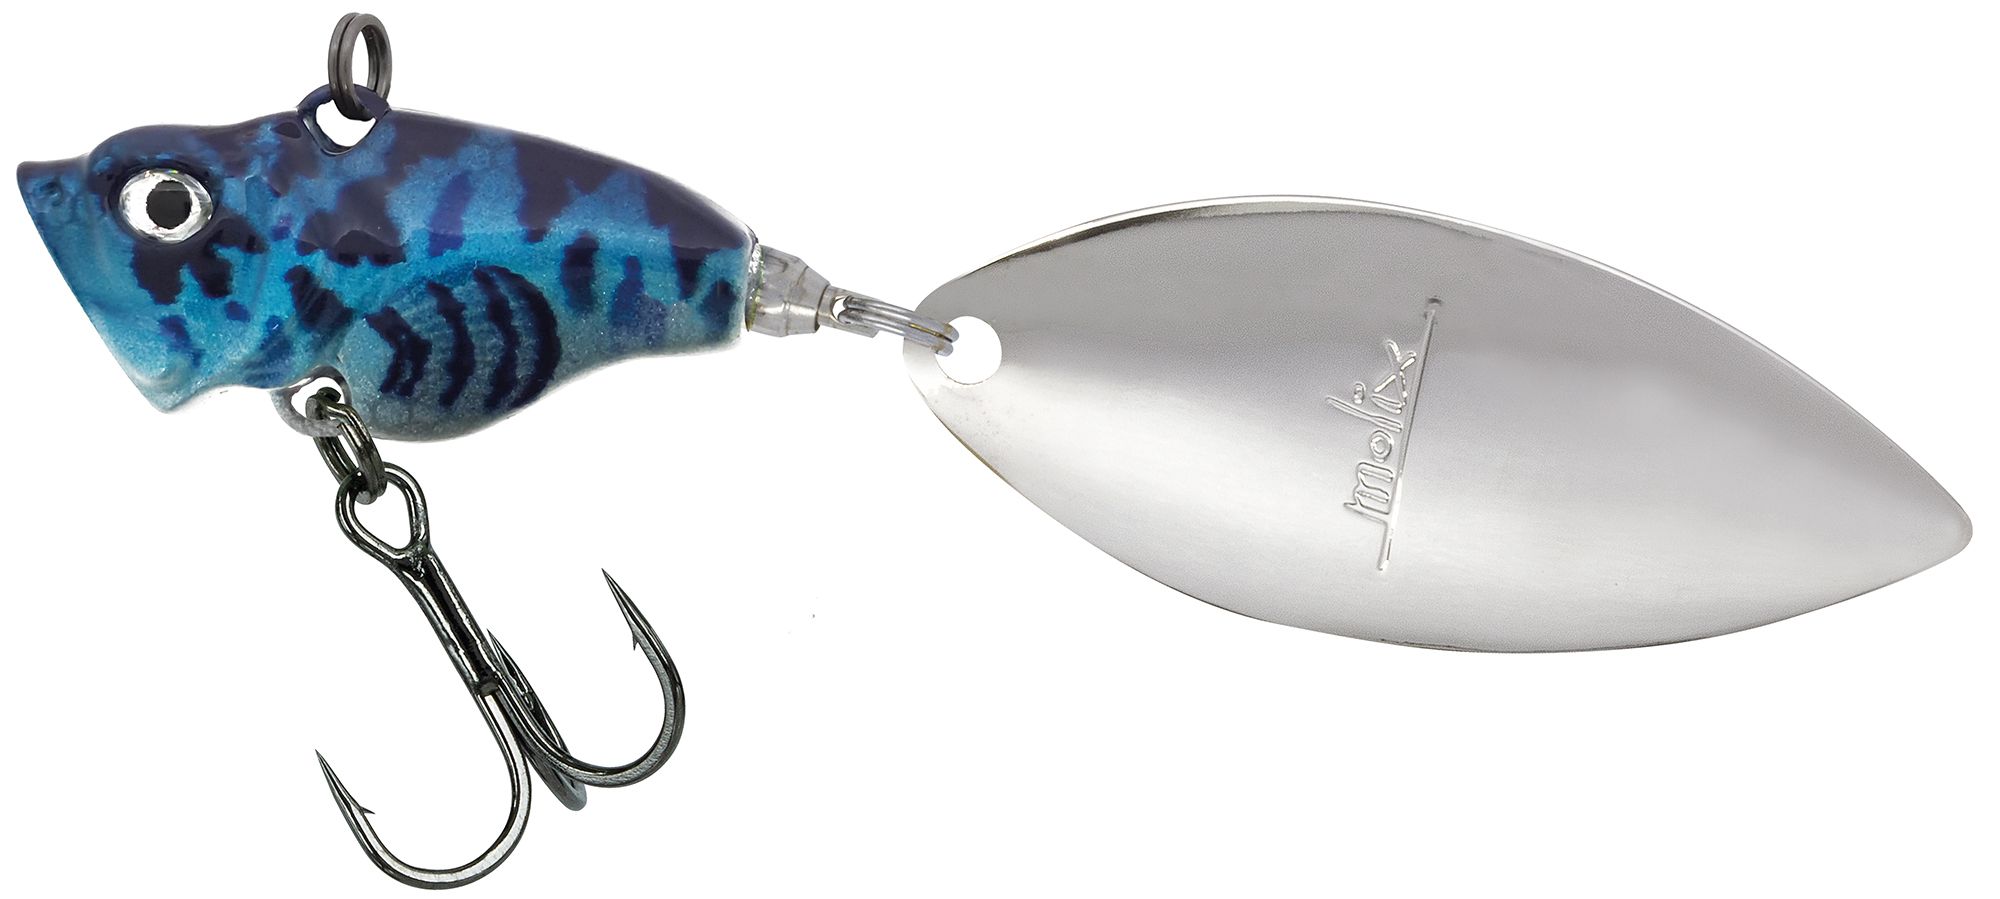 Metal Vibration Molix Trago Spin Tail Willow 1/2 oz col 536 F&B Goby